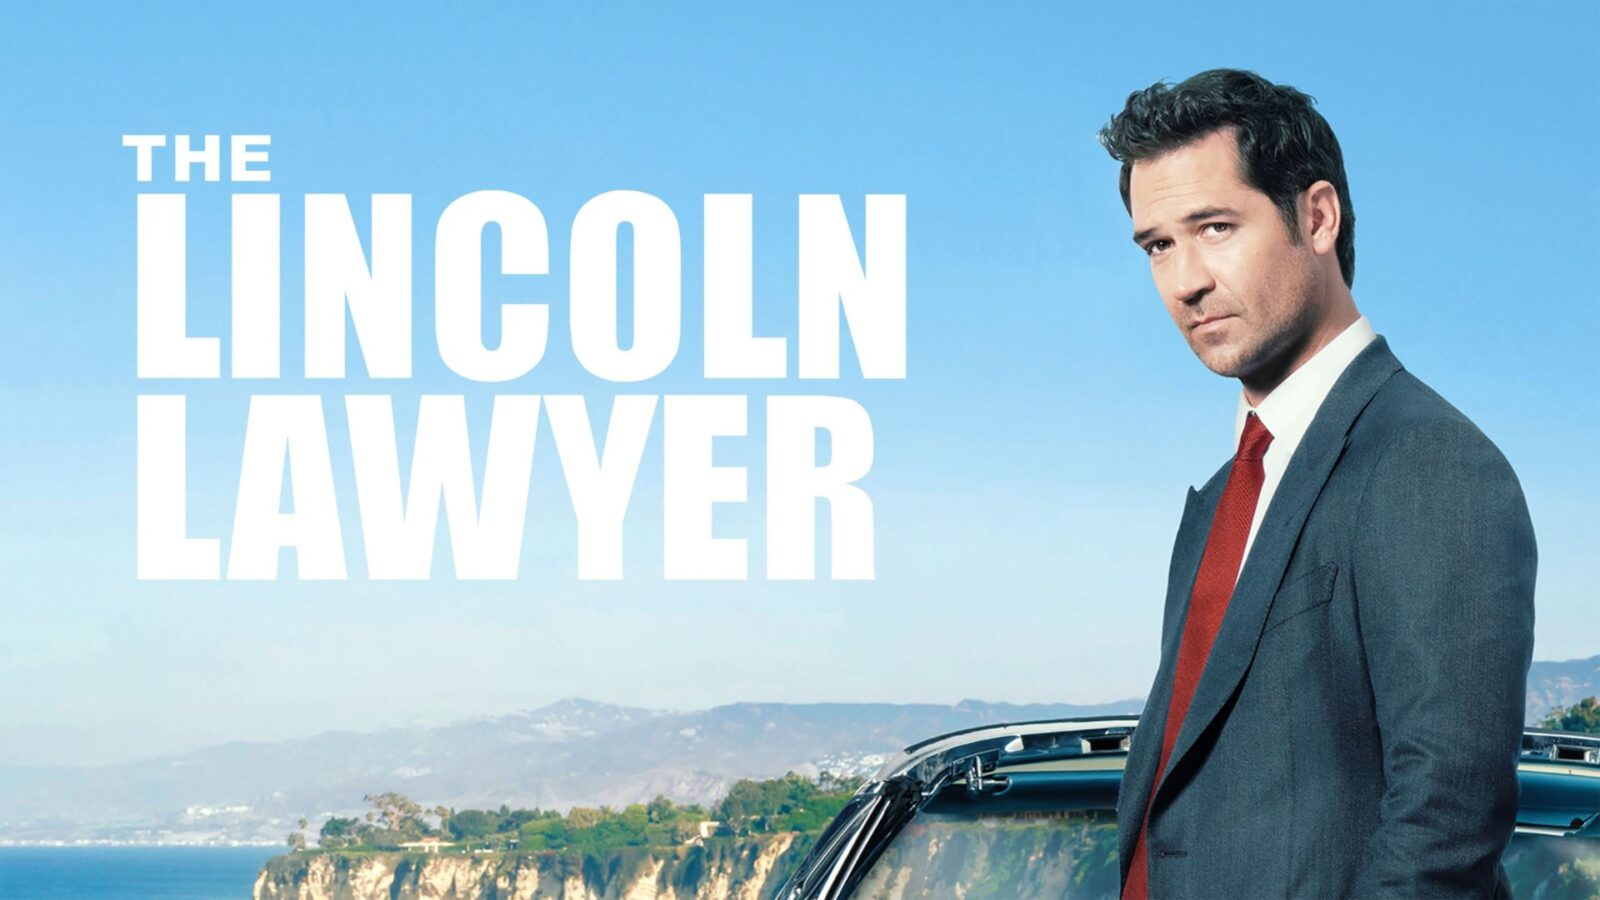 What You Need to Know About Lincoln Lawyer Season 2